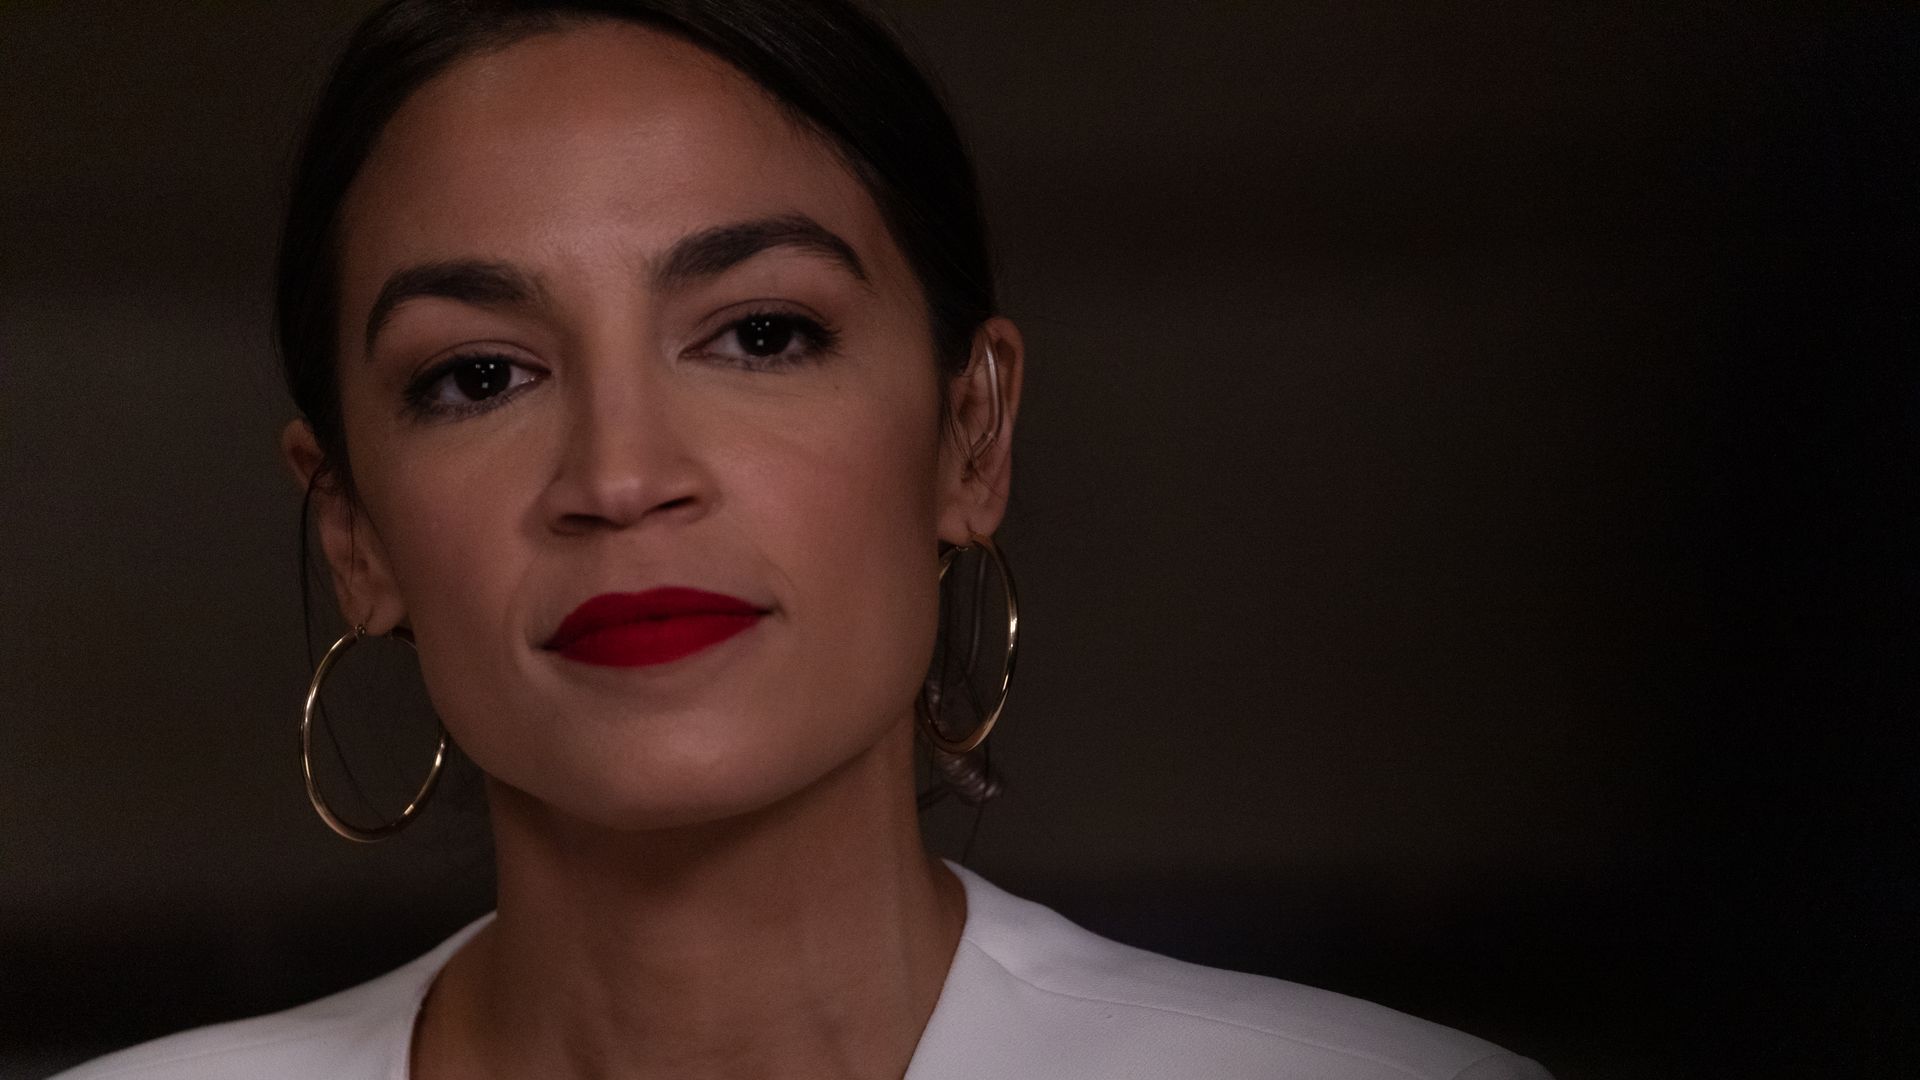 Rep. Alexandria Ocasio-Cortez (D-N.Y.) is  pushing for left-wing policies such as Medicare for All and the Green New Deal.